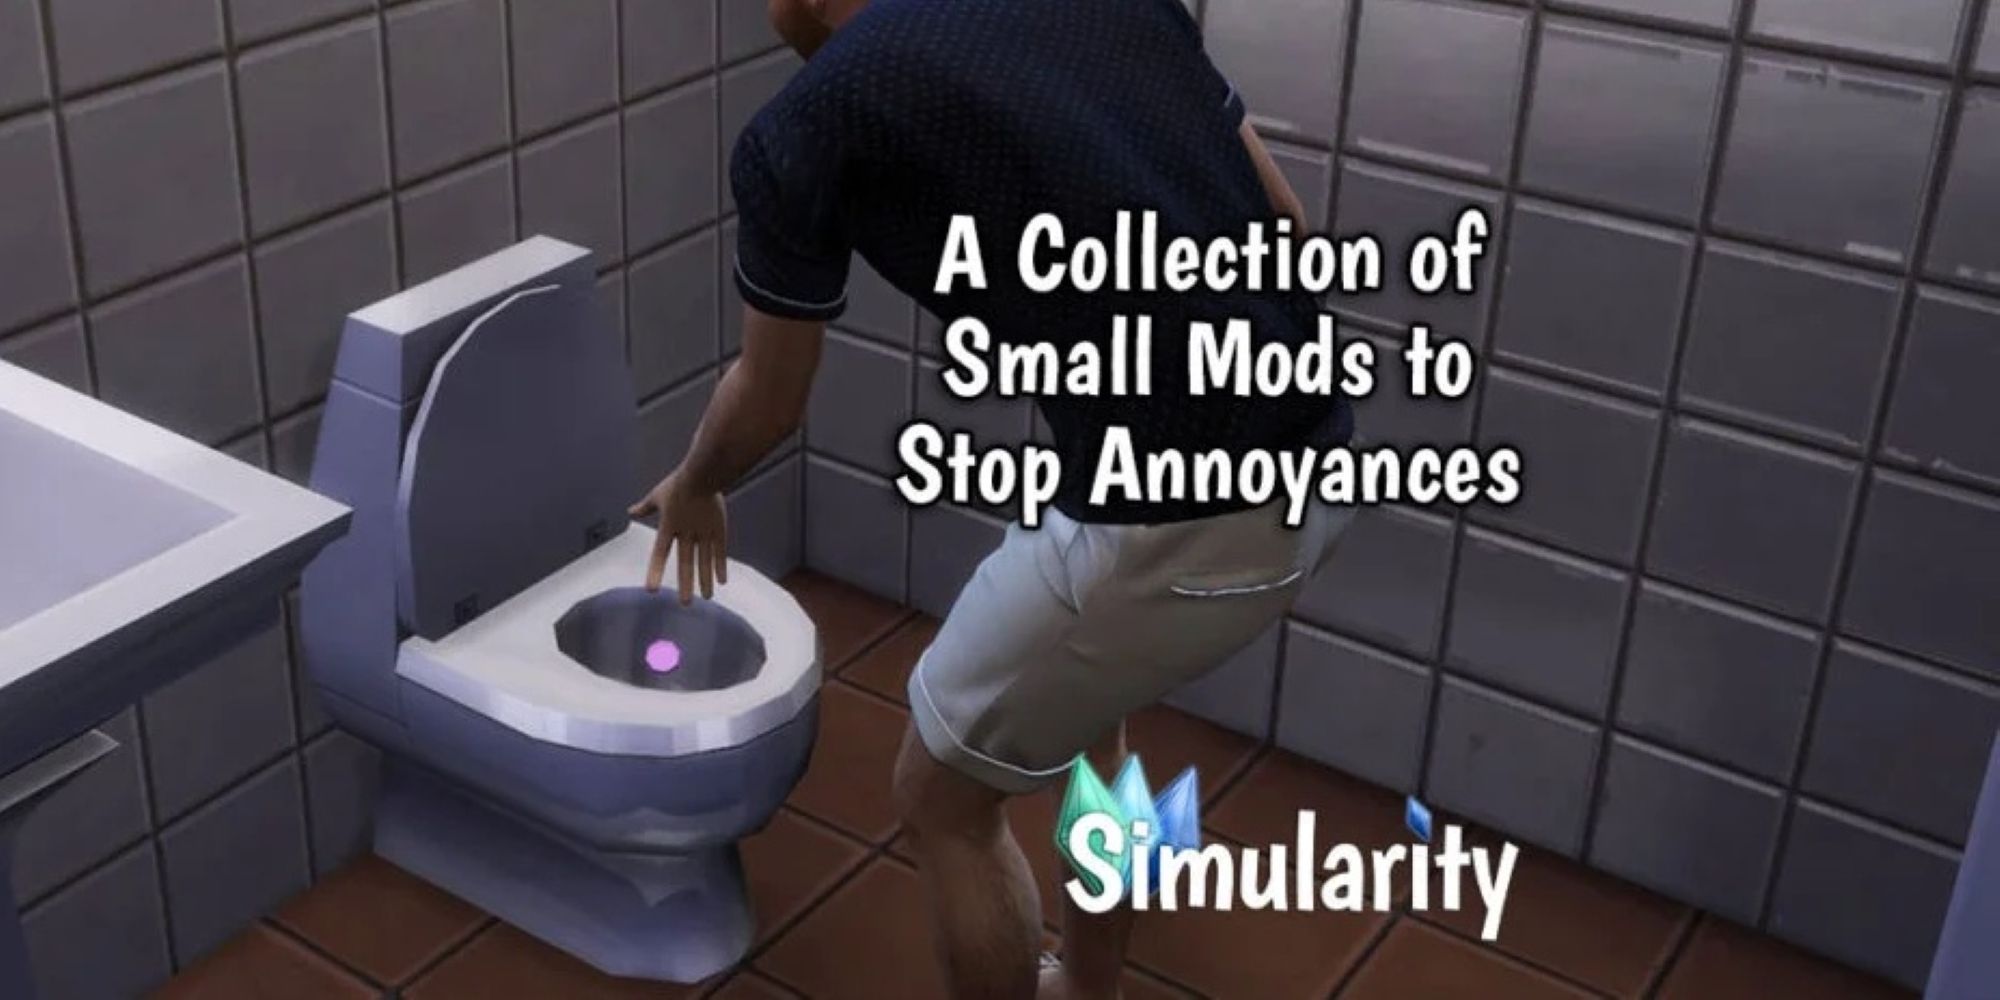 Screenshot of a The Sims 4 bathroom with text overlayed.